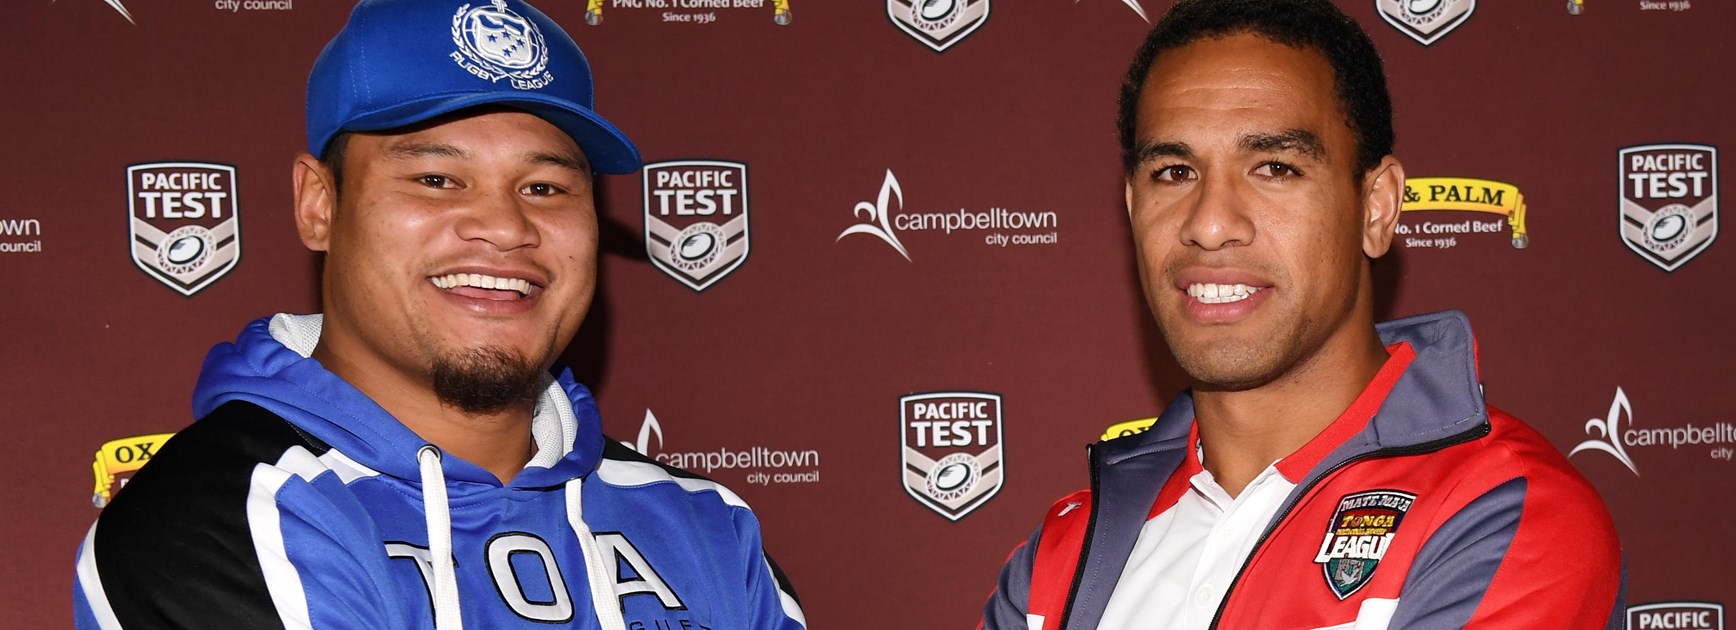 Rep weekend a welcome addition to NRL season